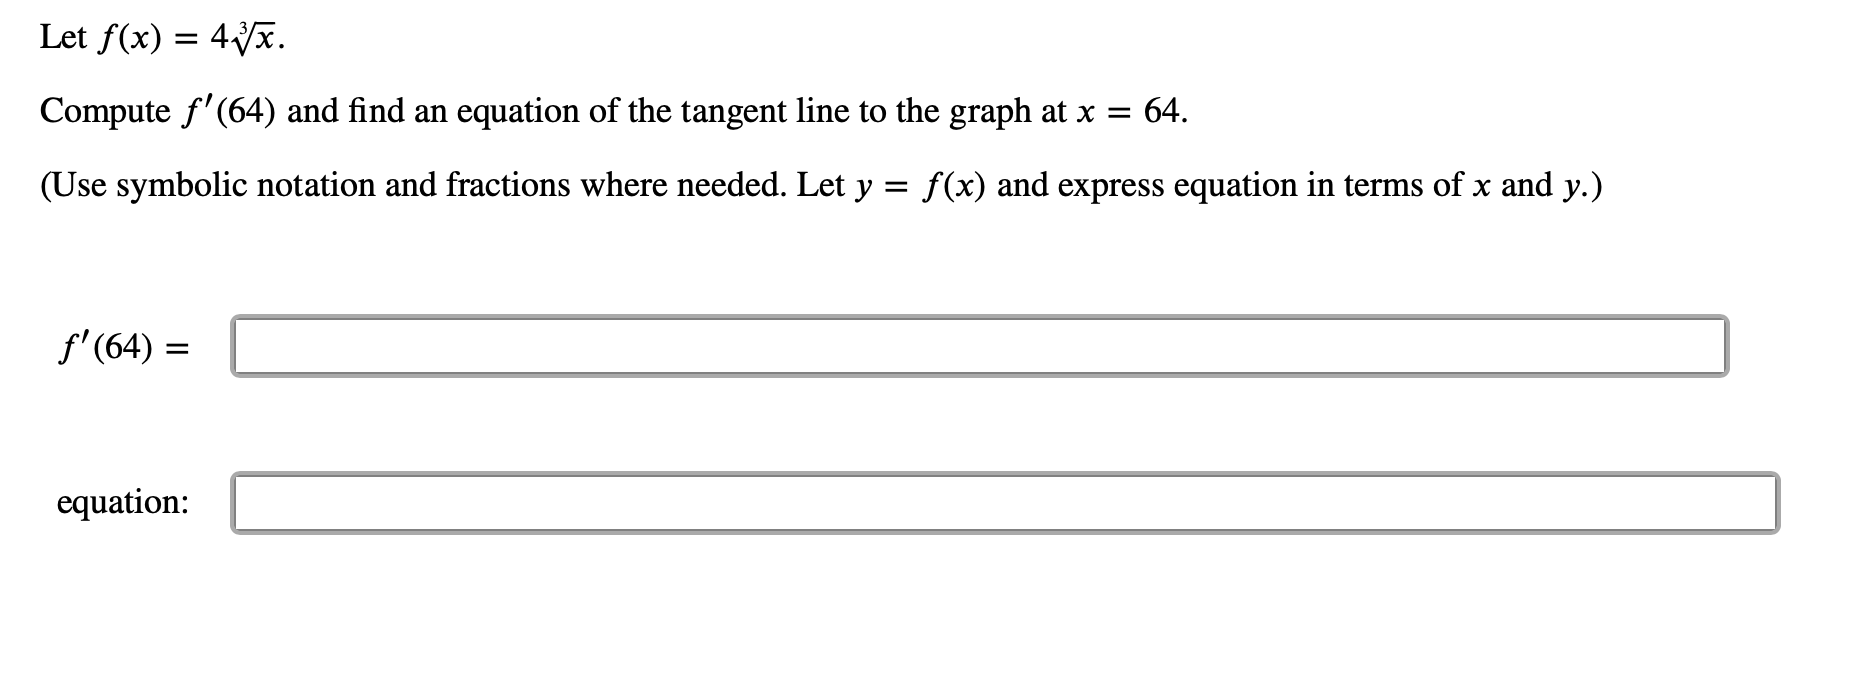 Let f(x) 4
=
equation of the tangent line to the graph at x
Compute f'(64) and find an
64.
(Use symbolic notation and fractions where needed. Let y = f(x) and express equation in terms of x and y.)
f'(64)
equation:
